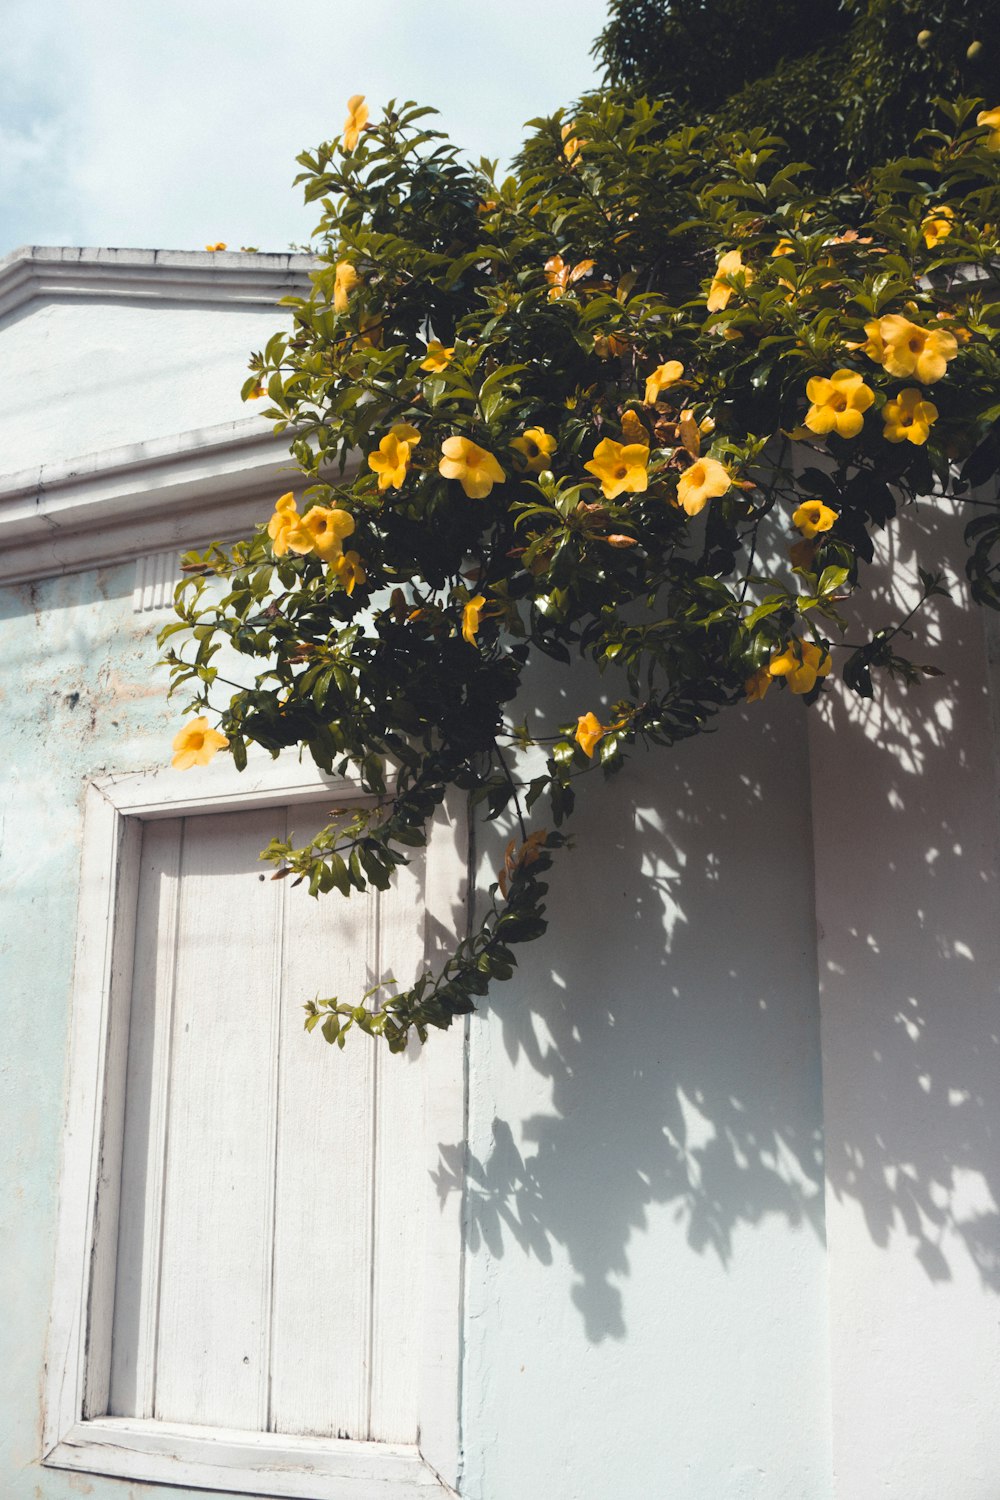 a tree with yellow flowers in front of a white building